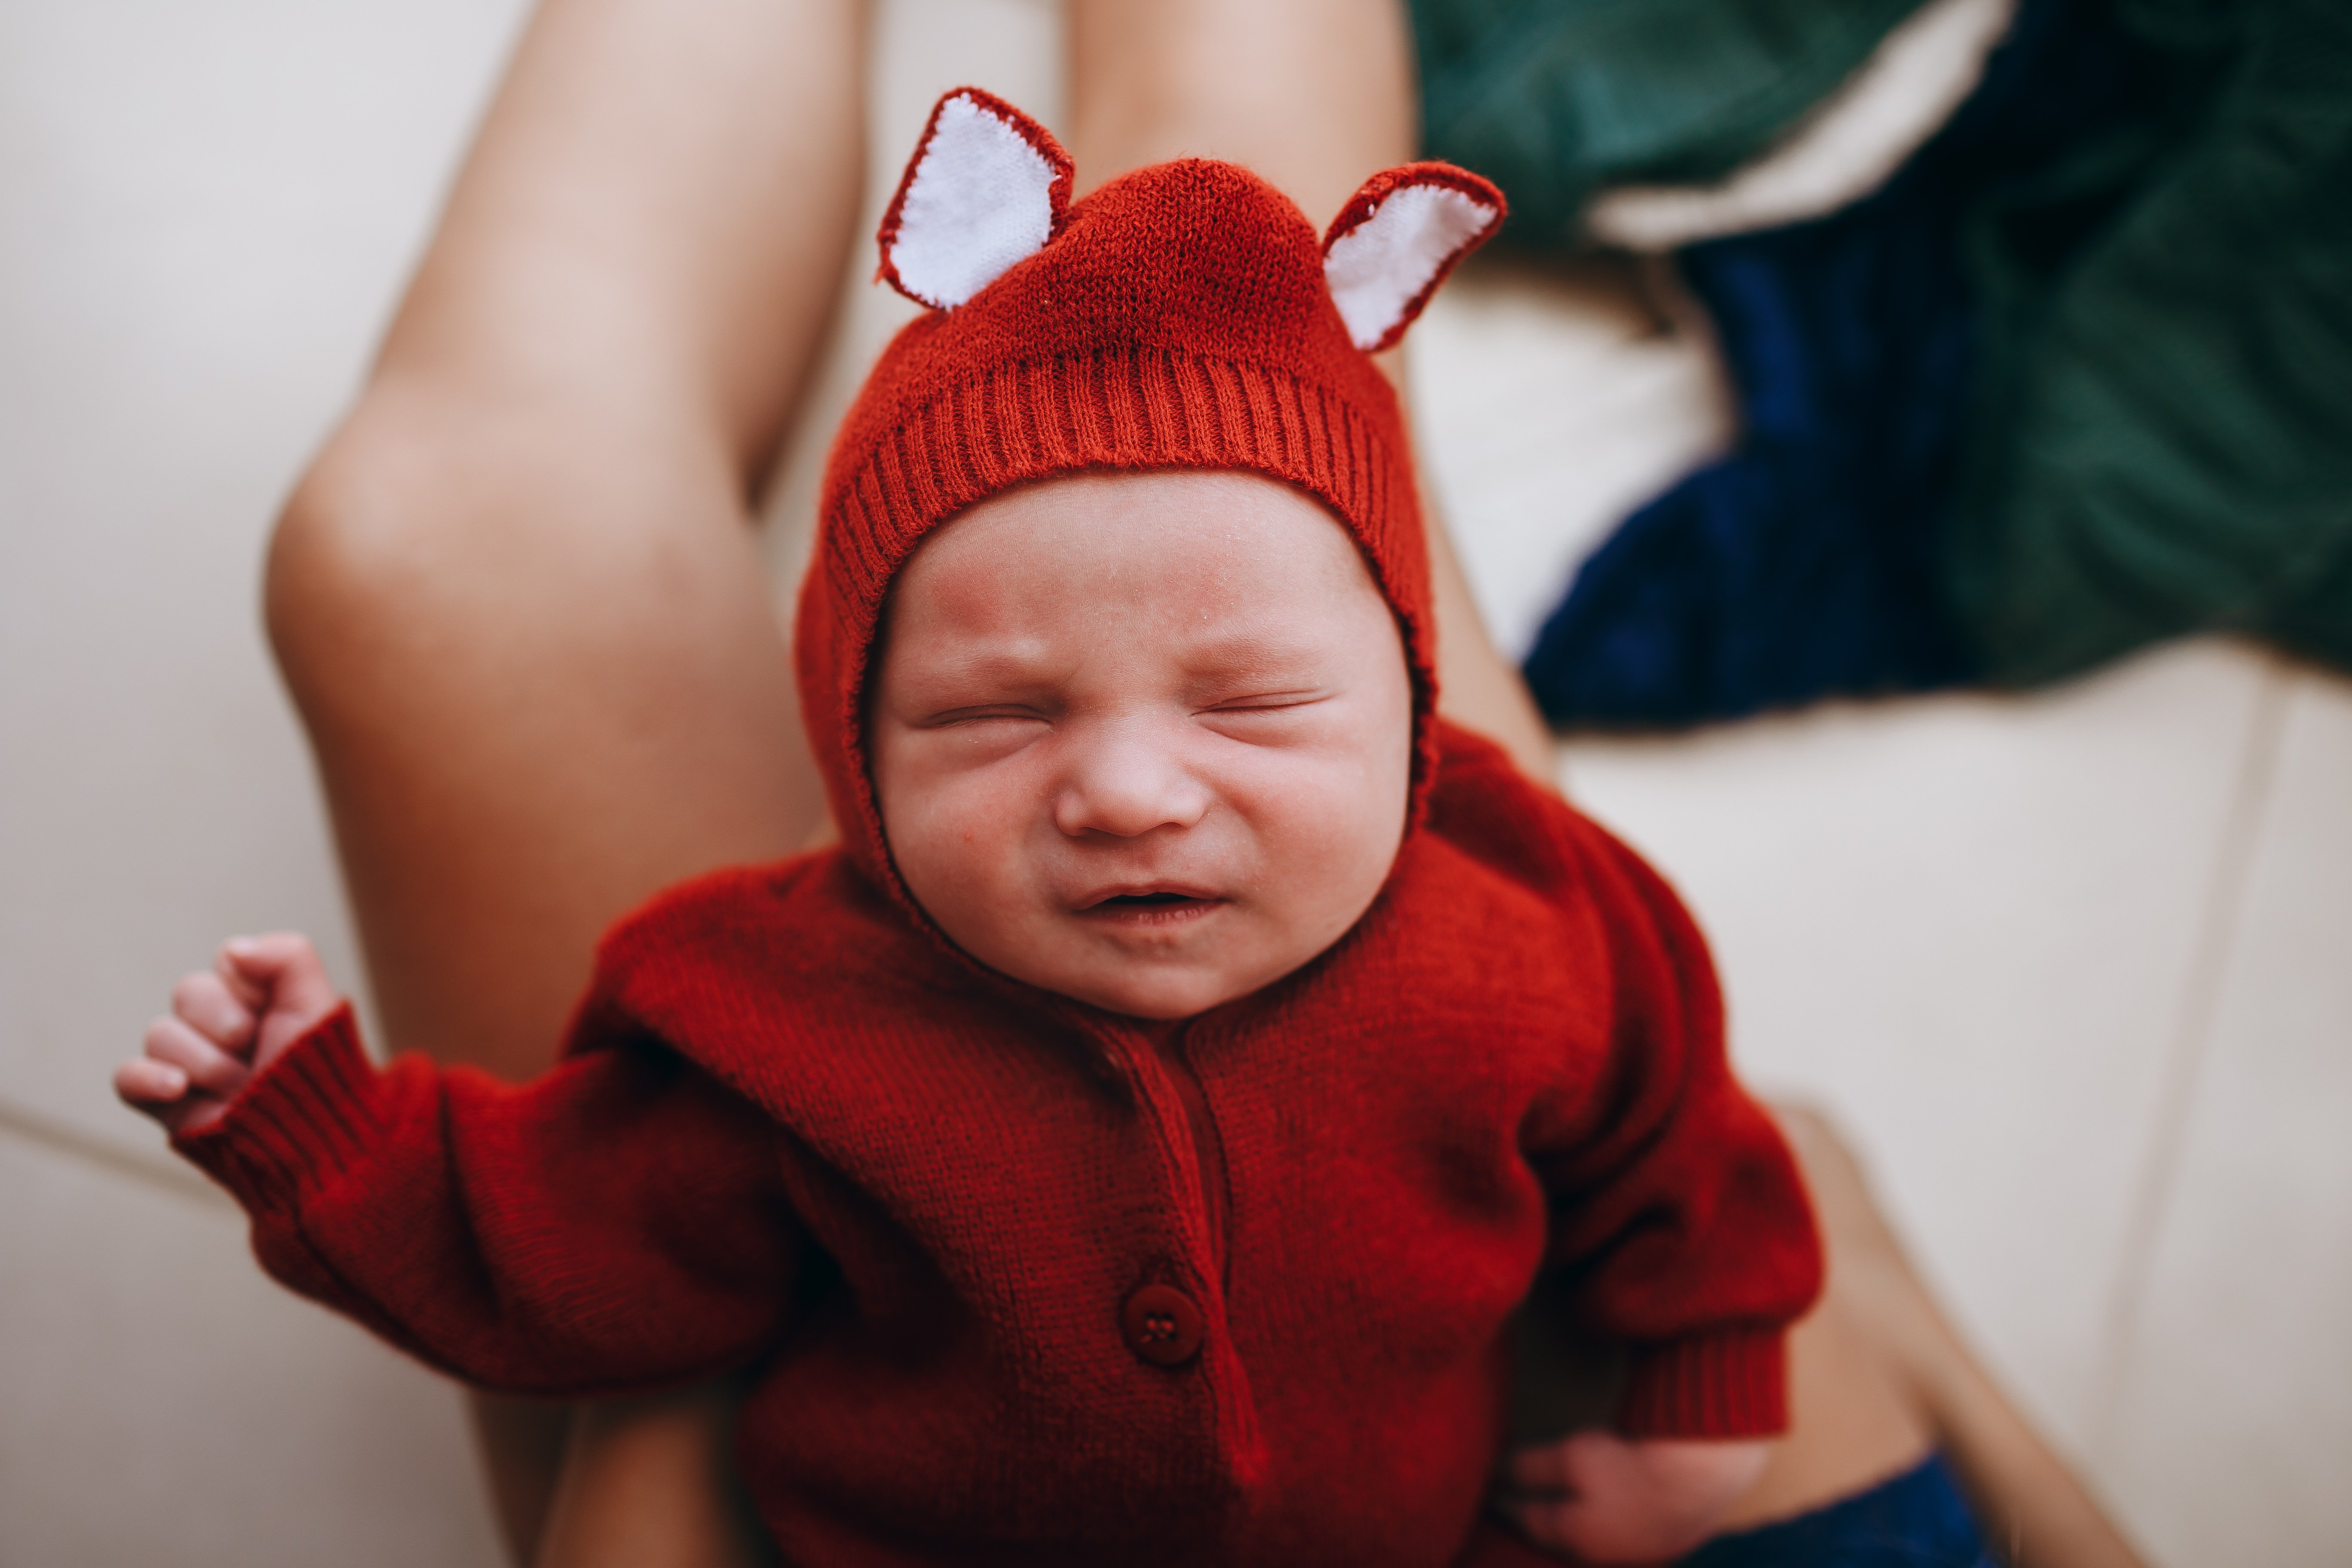 Lucy and Ross named the child Amelia | Photo: Pexels